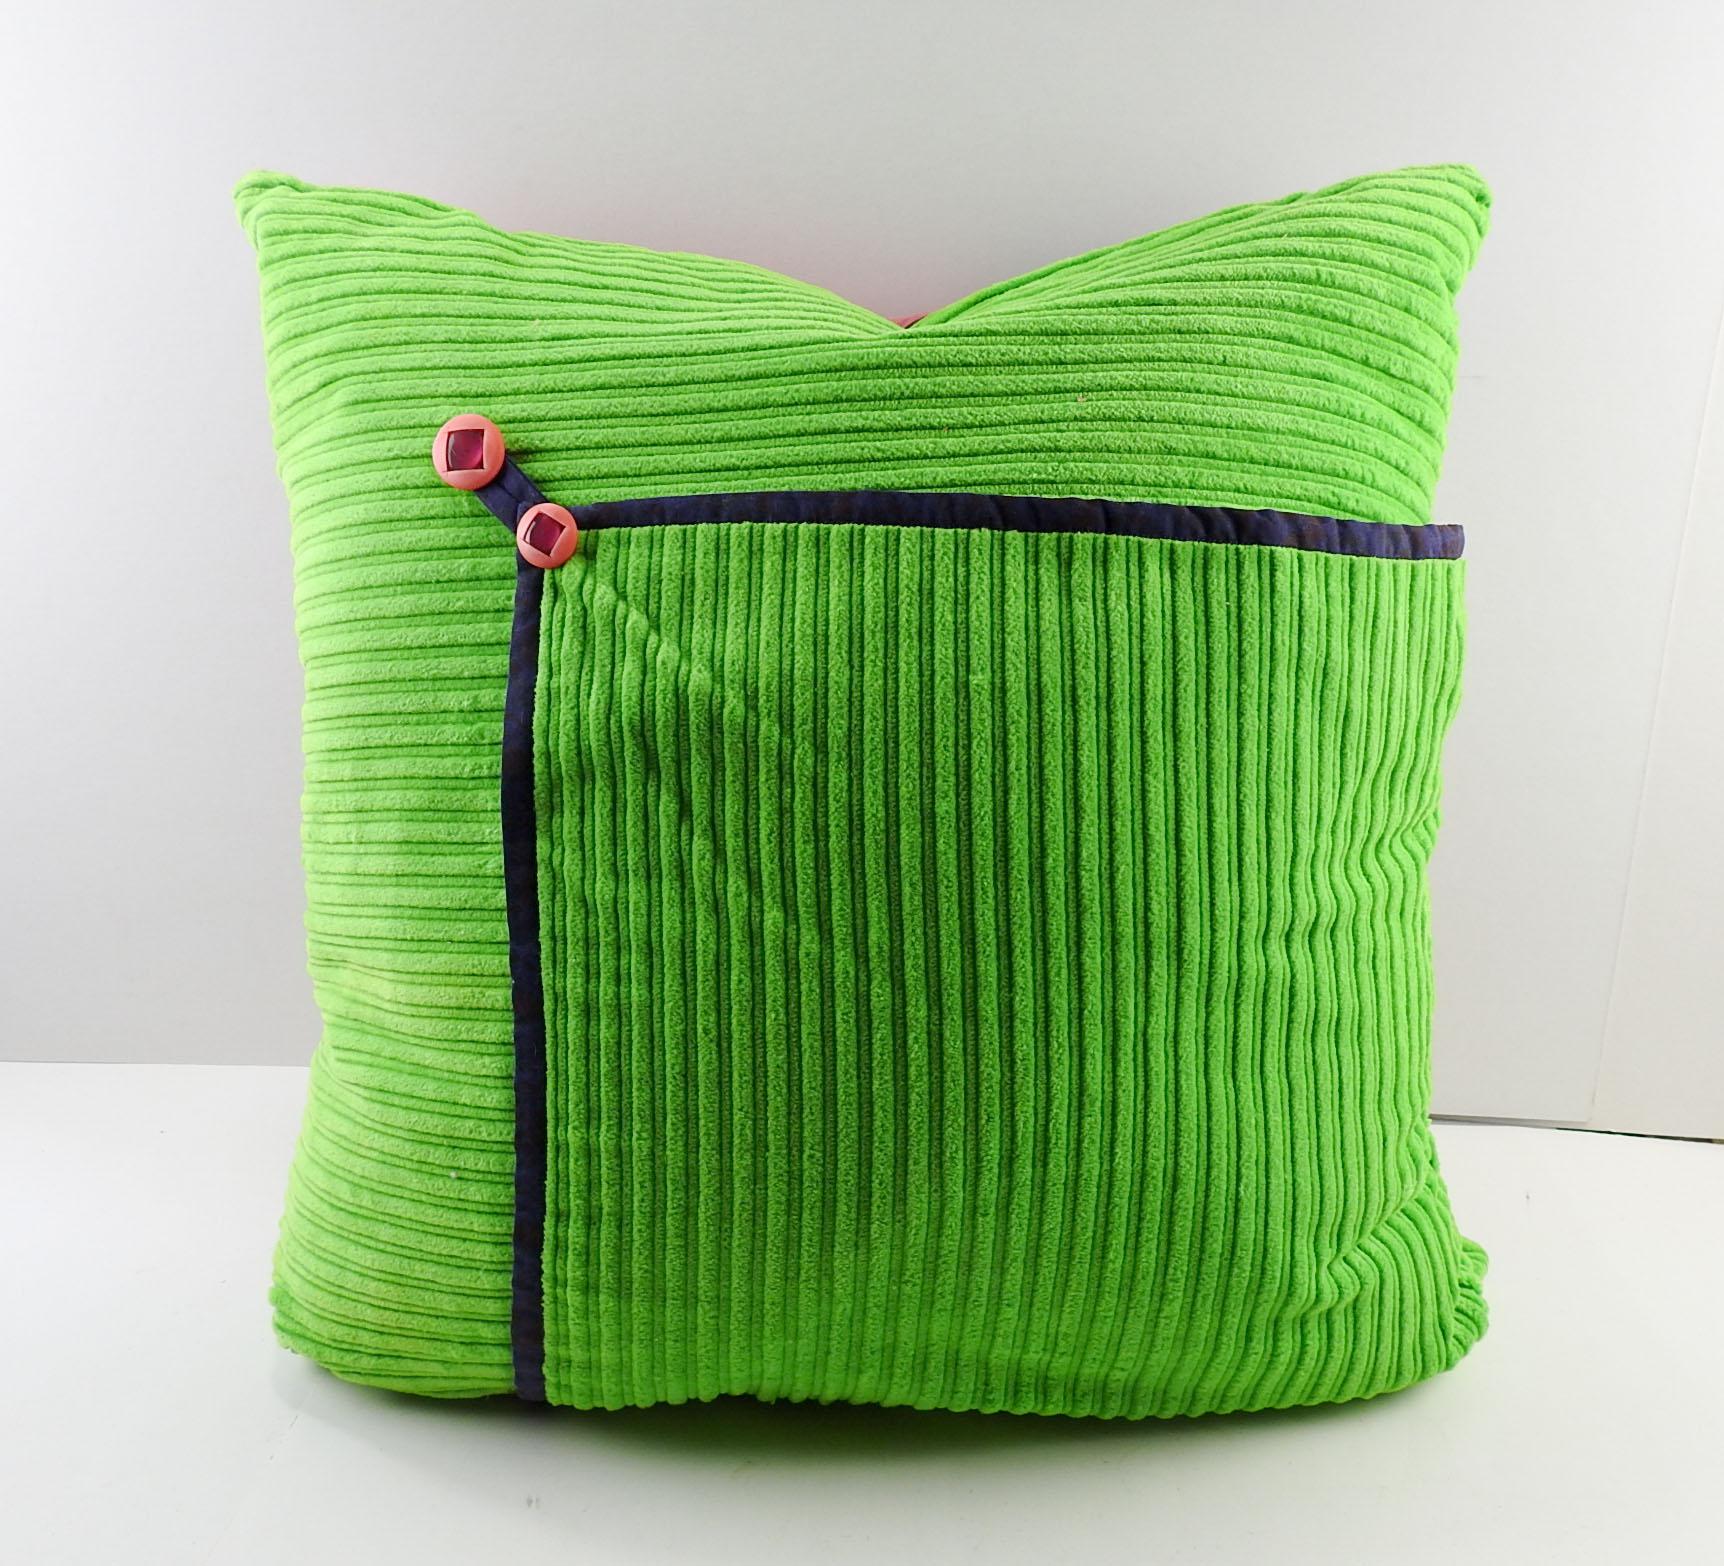 American Artist Quited Green & Pink Monoprint Pillow For Sale